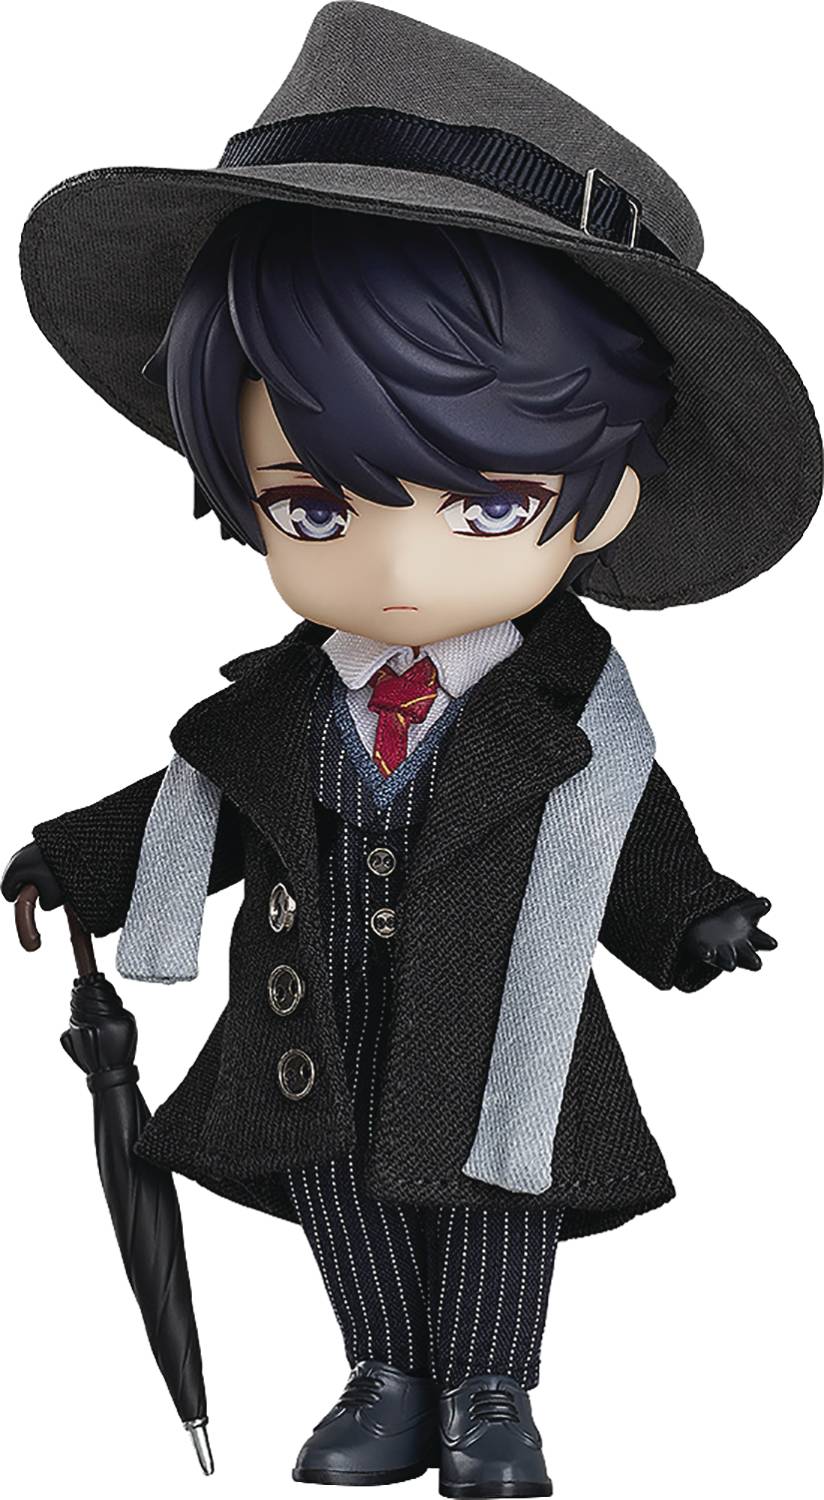 Nendoroid: Mr Love Queens Choice - Victor, If Time Flows Back Ver - Third Eye